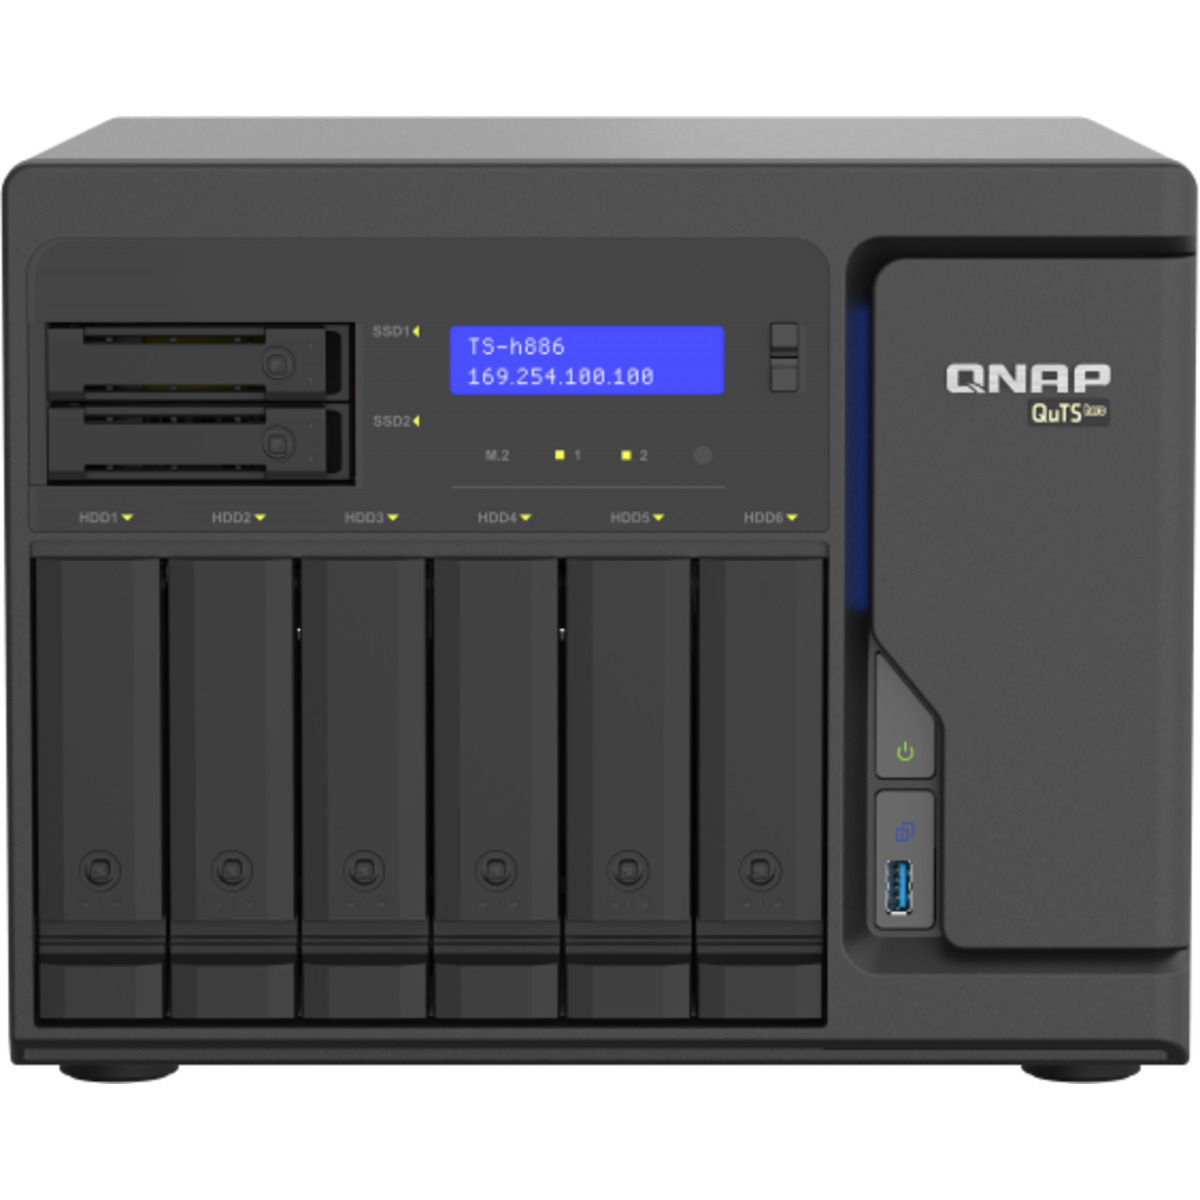 buy $2456 QNAP TS-h886 QuTS hero NAS 12tb Desktop NAS - Network Attached Storage Device 6x2000gb Seagate BarraCuda ST2000DM008 3.5 7200rpm SATA 6Gb/s HDD CONSUMER Class Drives Installed - Burn-In Tested - ON SALE - nas headquarters buy network attached storage server device das new raid-5 free shipping usa christmas new year holiday sale TS-h886 QuTS hero NAS